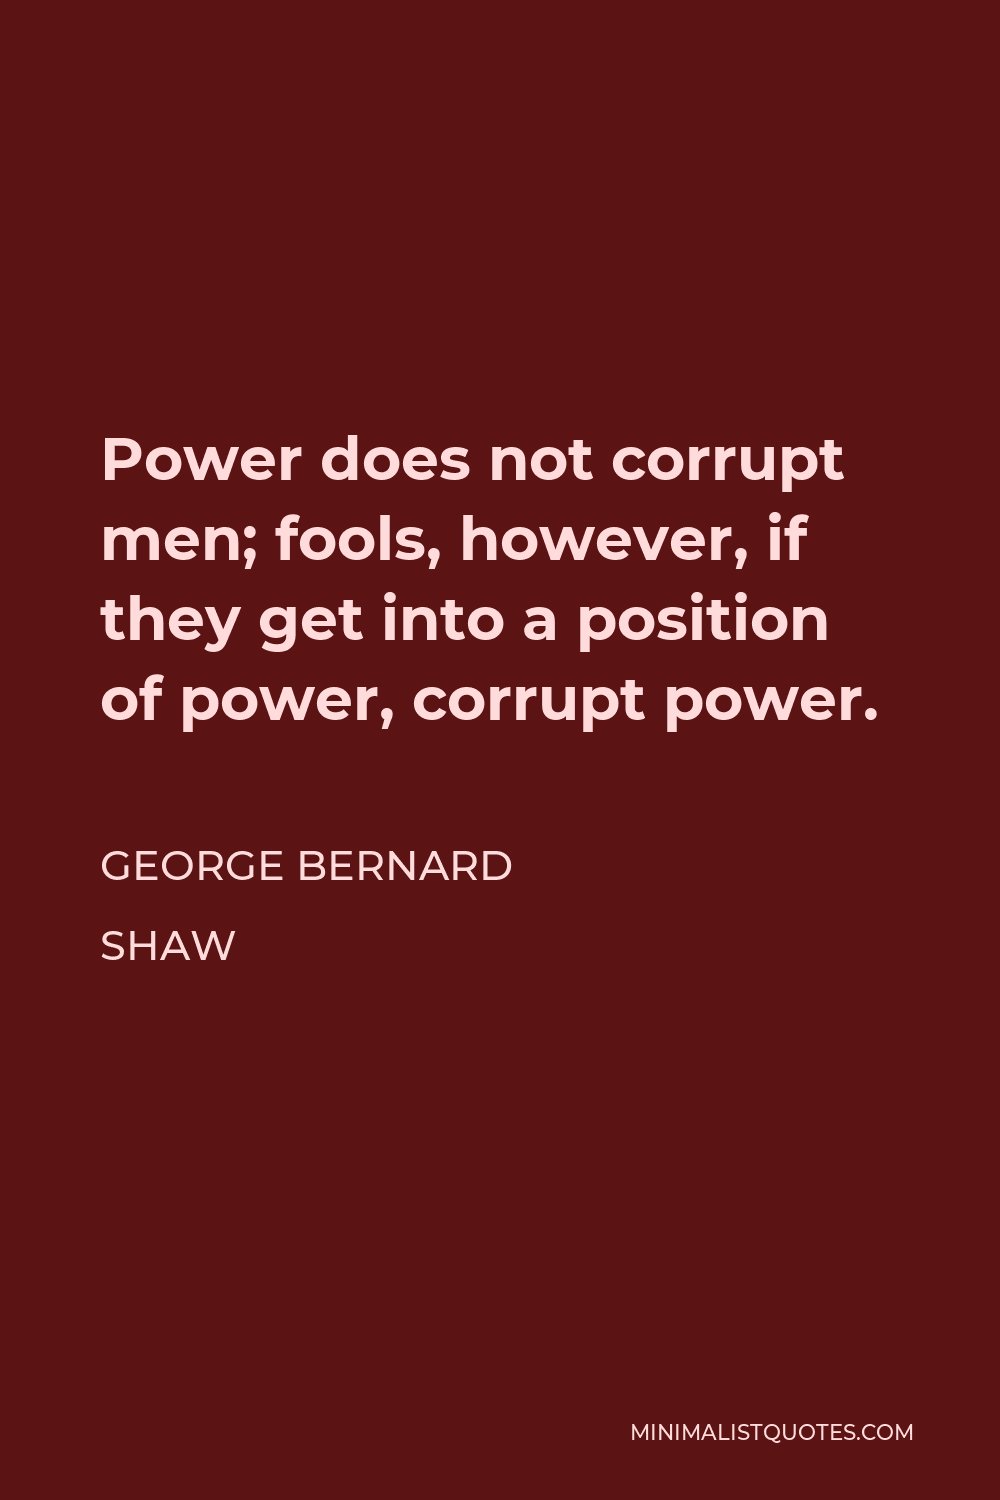 George Bernard Shaw Quote - Power does not corrupt men; fools, however, if they get into a position of power, corrupt power.